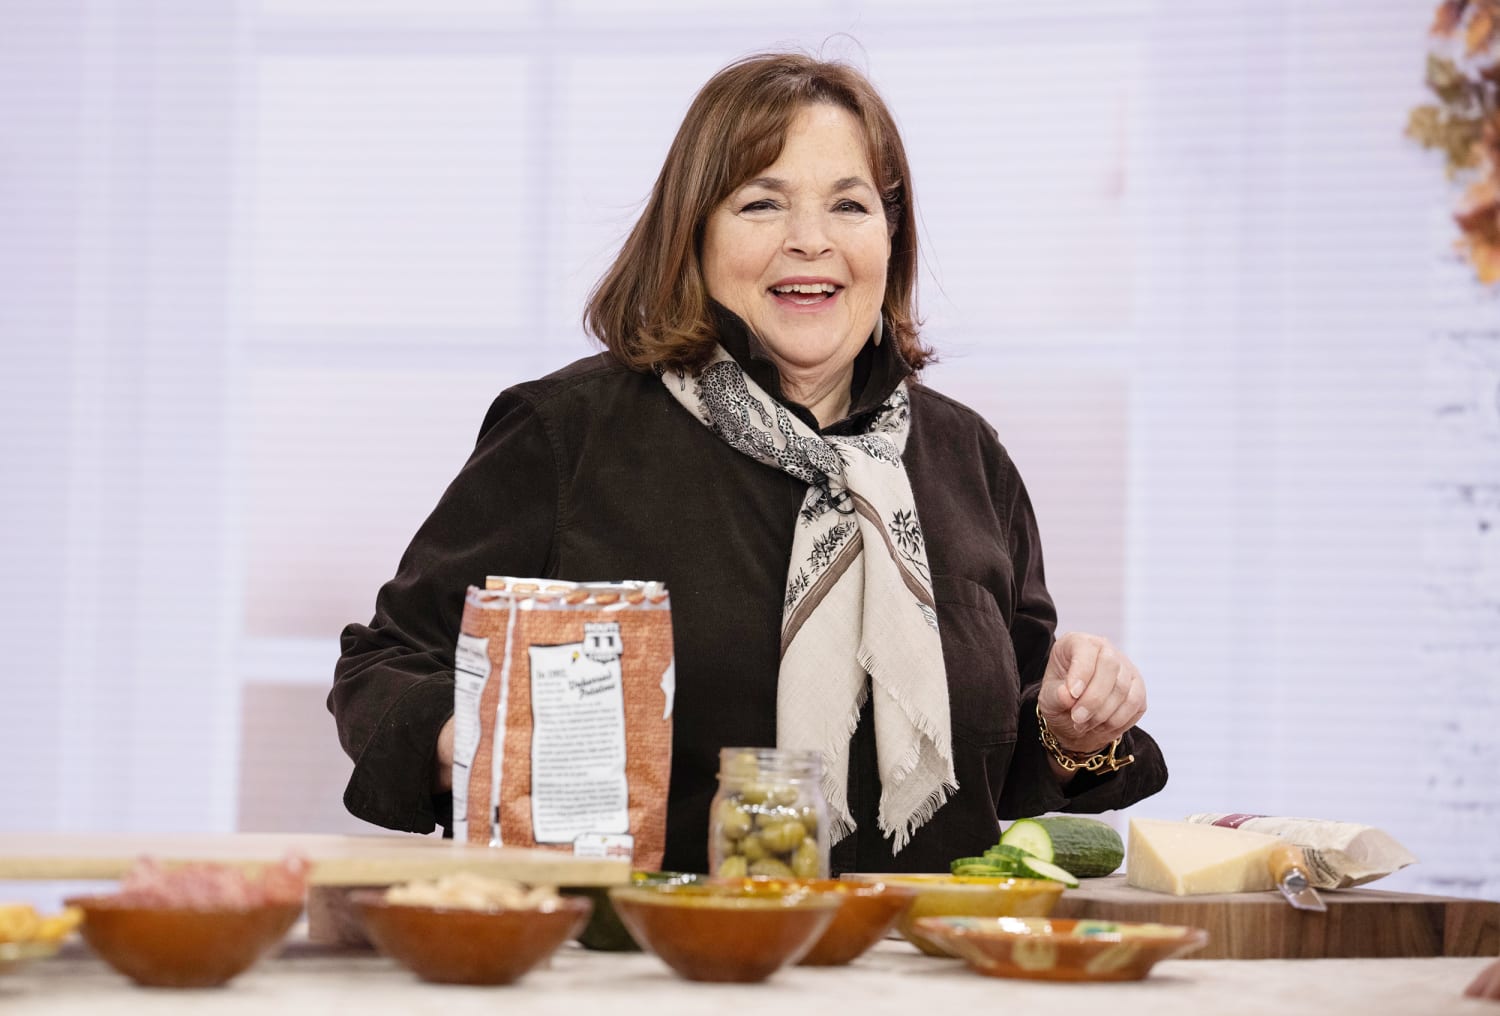 Ina Garten gives fans a first look at her highly anticipated memoir